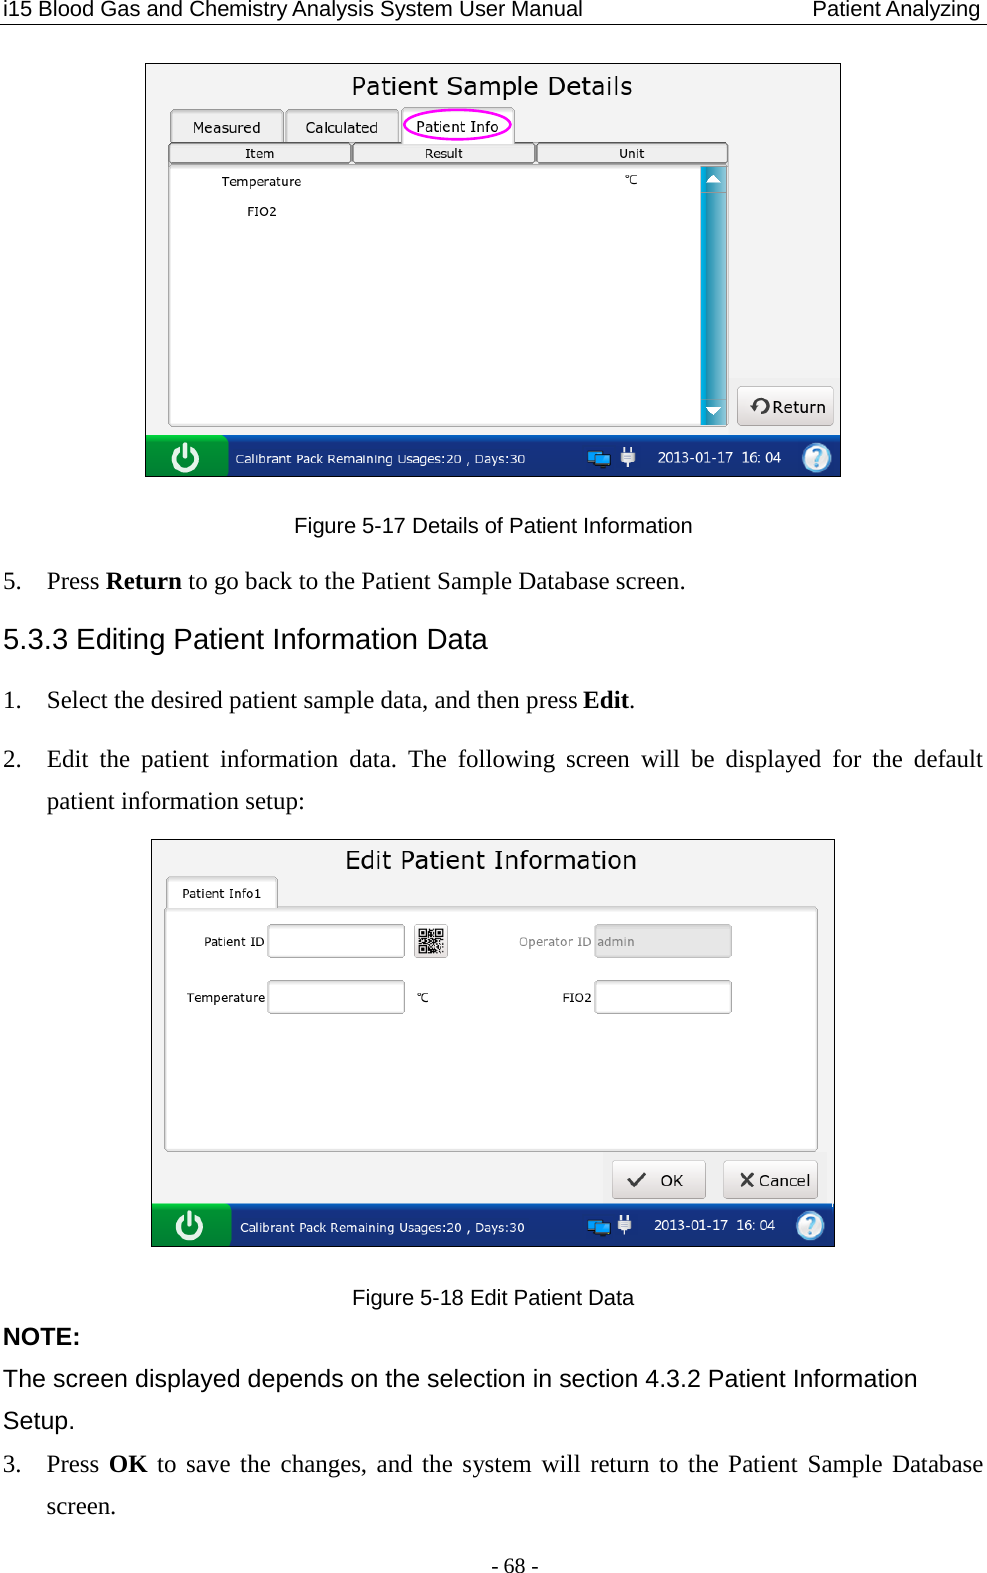 i15 Blood Gas and Chemistry Analysis System User Manual                            Patient Analyzing - 68 -  Figure 5-17 Details of Patient Information 5. Press Return to go back to the Patient Sample Database screen. 5.3.3 Editing Patient Information Data 1. Select the desired patient sample data, and then press Edit. 2. Edit the patient information data.  The  following screen will be  displayed for the default patient information setup:  Figure 5-18 Edit Patient Data NOTE: The screen displayed depends on the selection in section 4.3.2 Patient Information Setup. 3. Press OK to save the changes, and the system will return to the Patient Sample Database screen. 